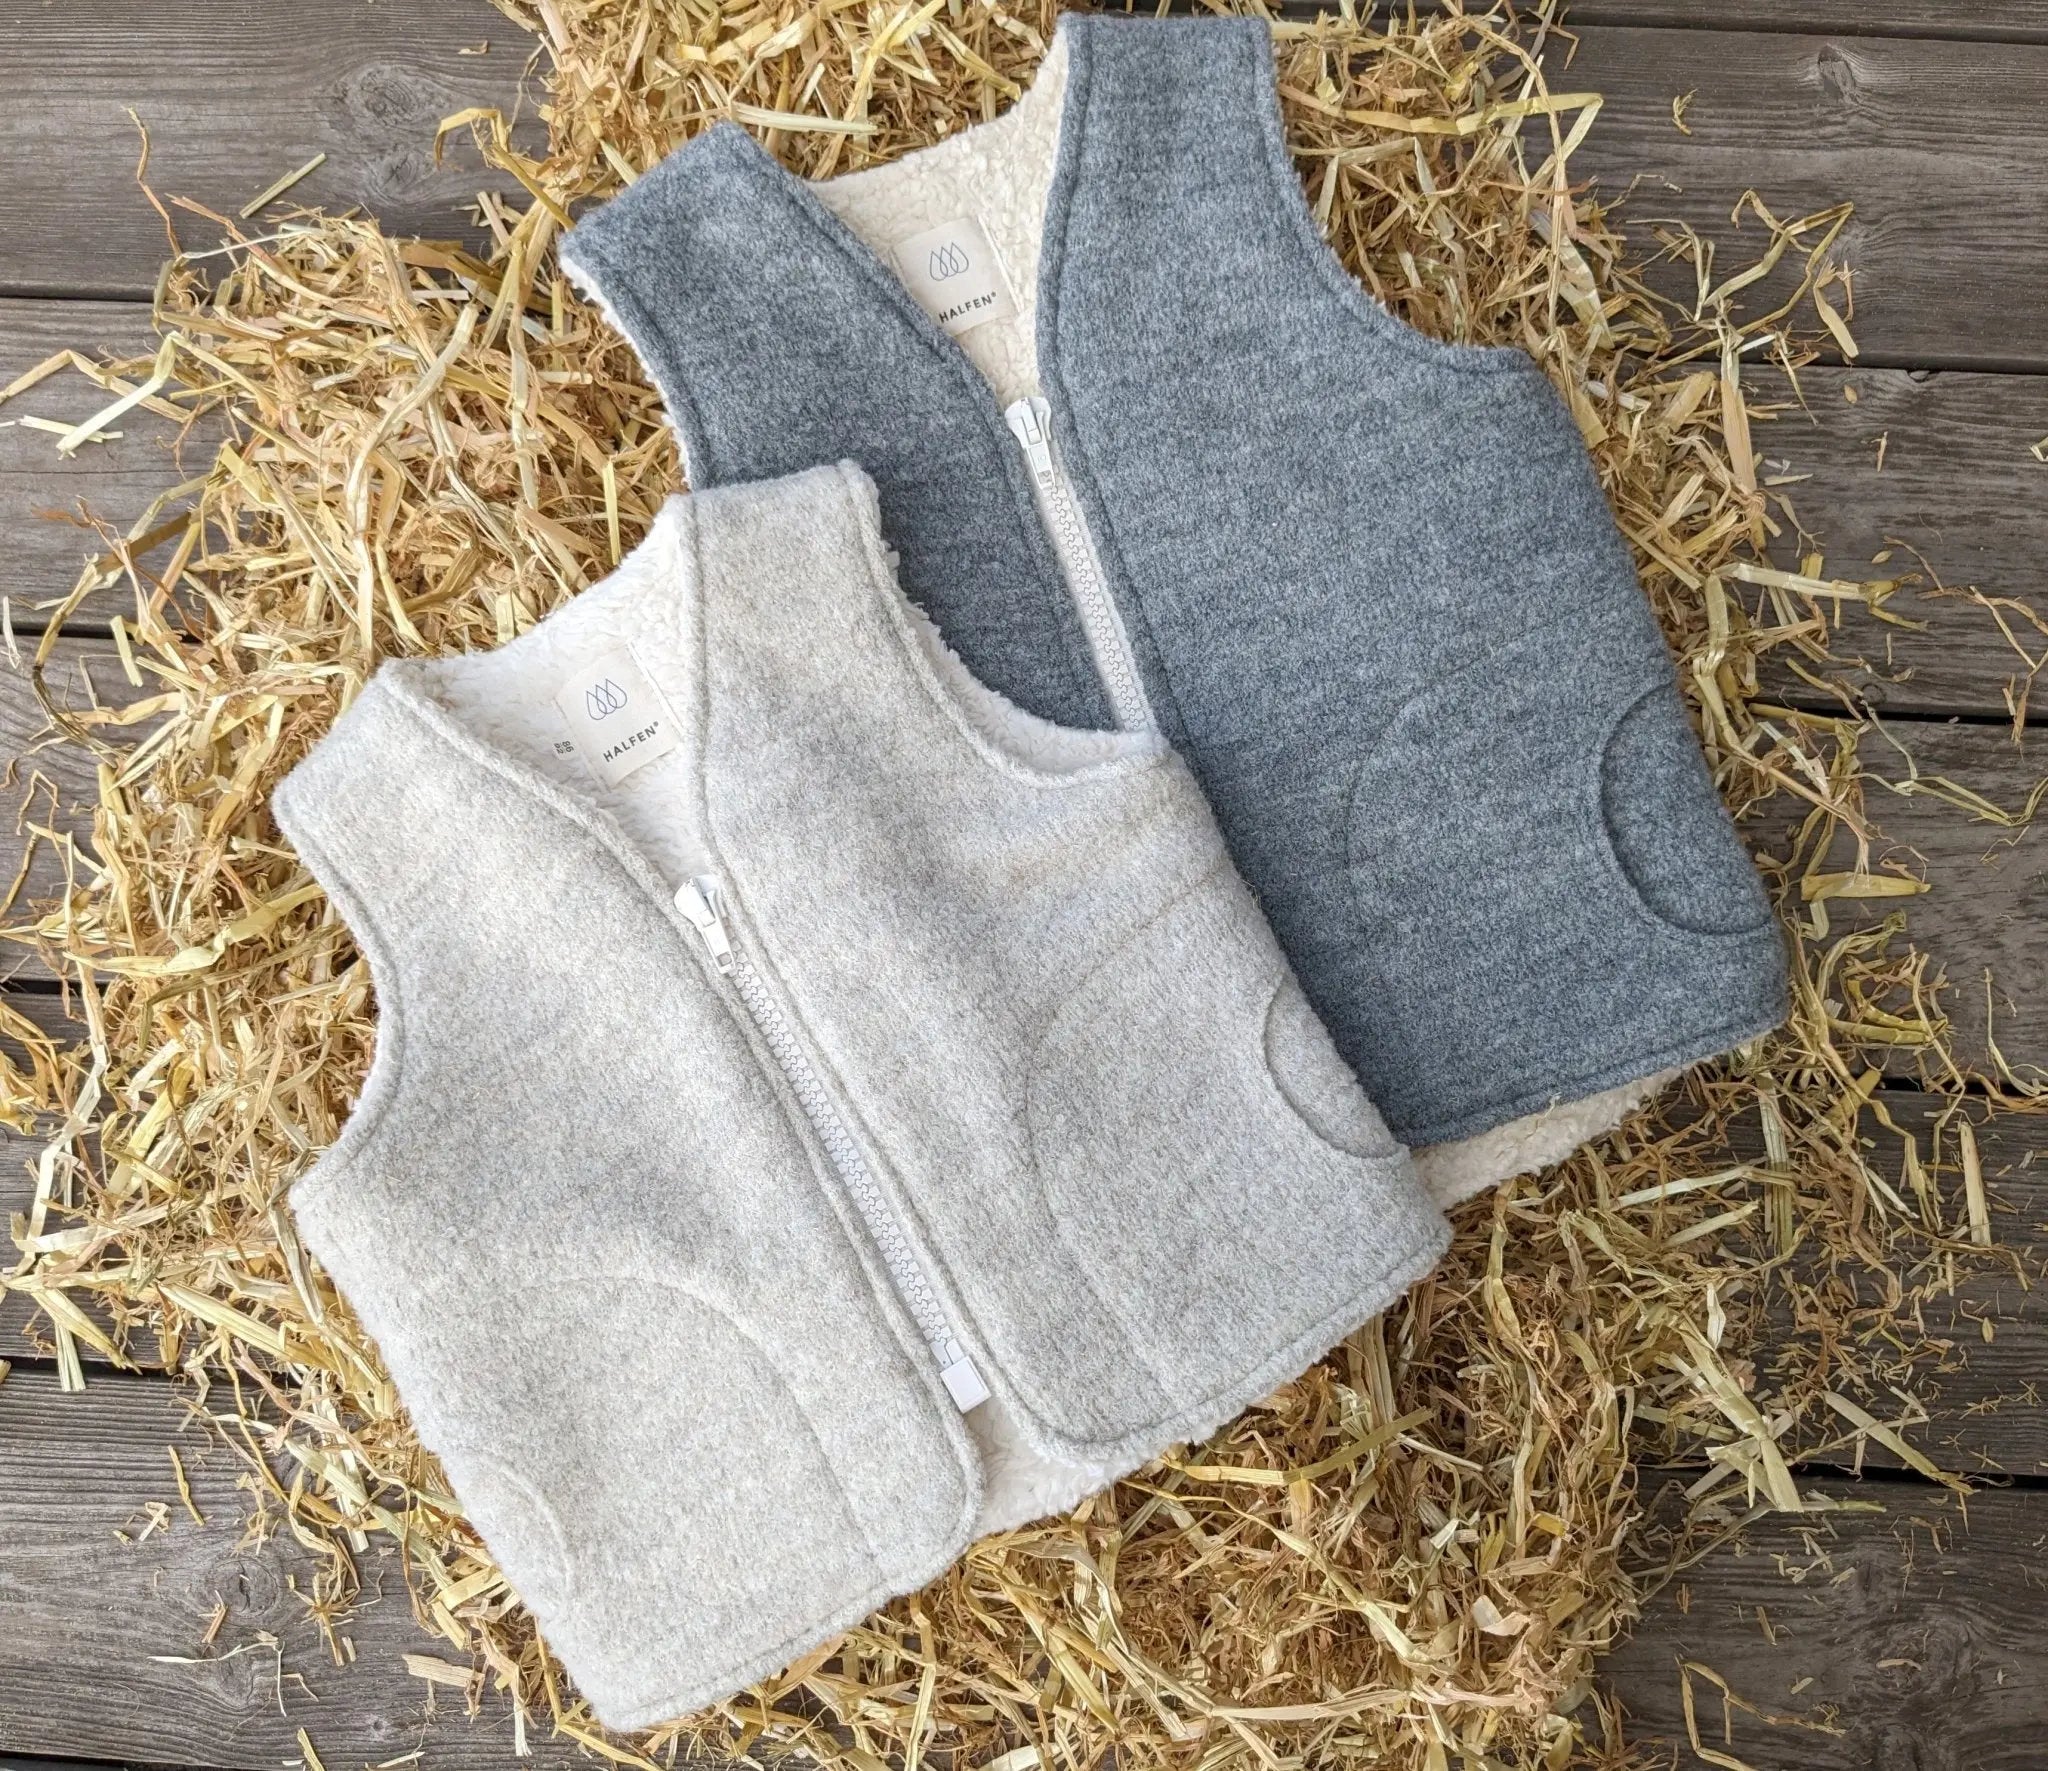 Teddy vest made of wool with a zipper - Babybox and Family